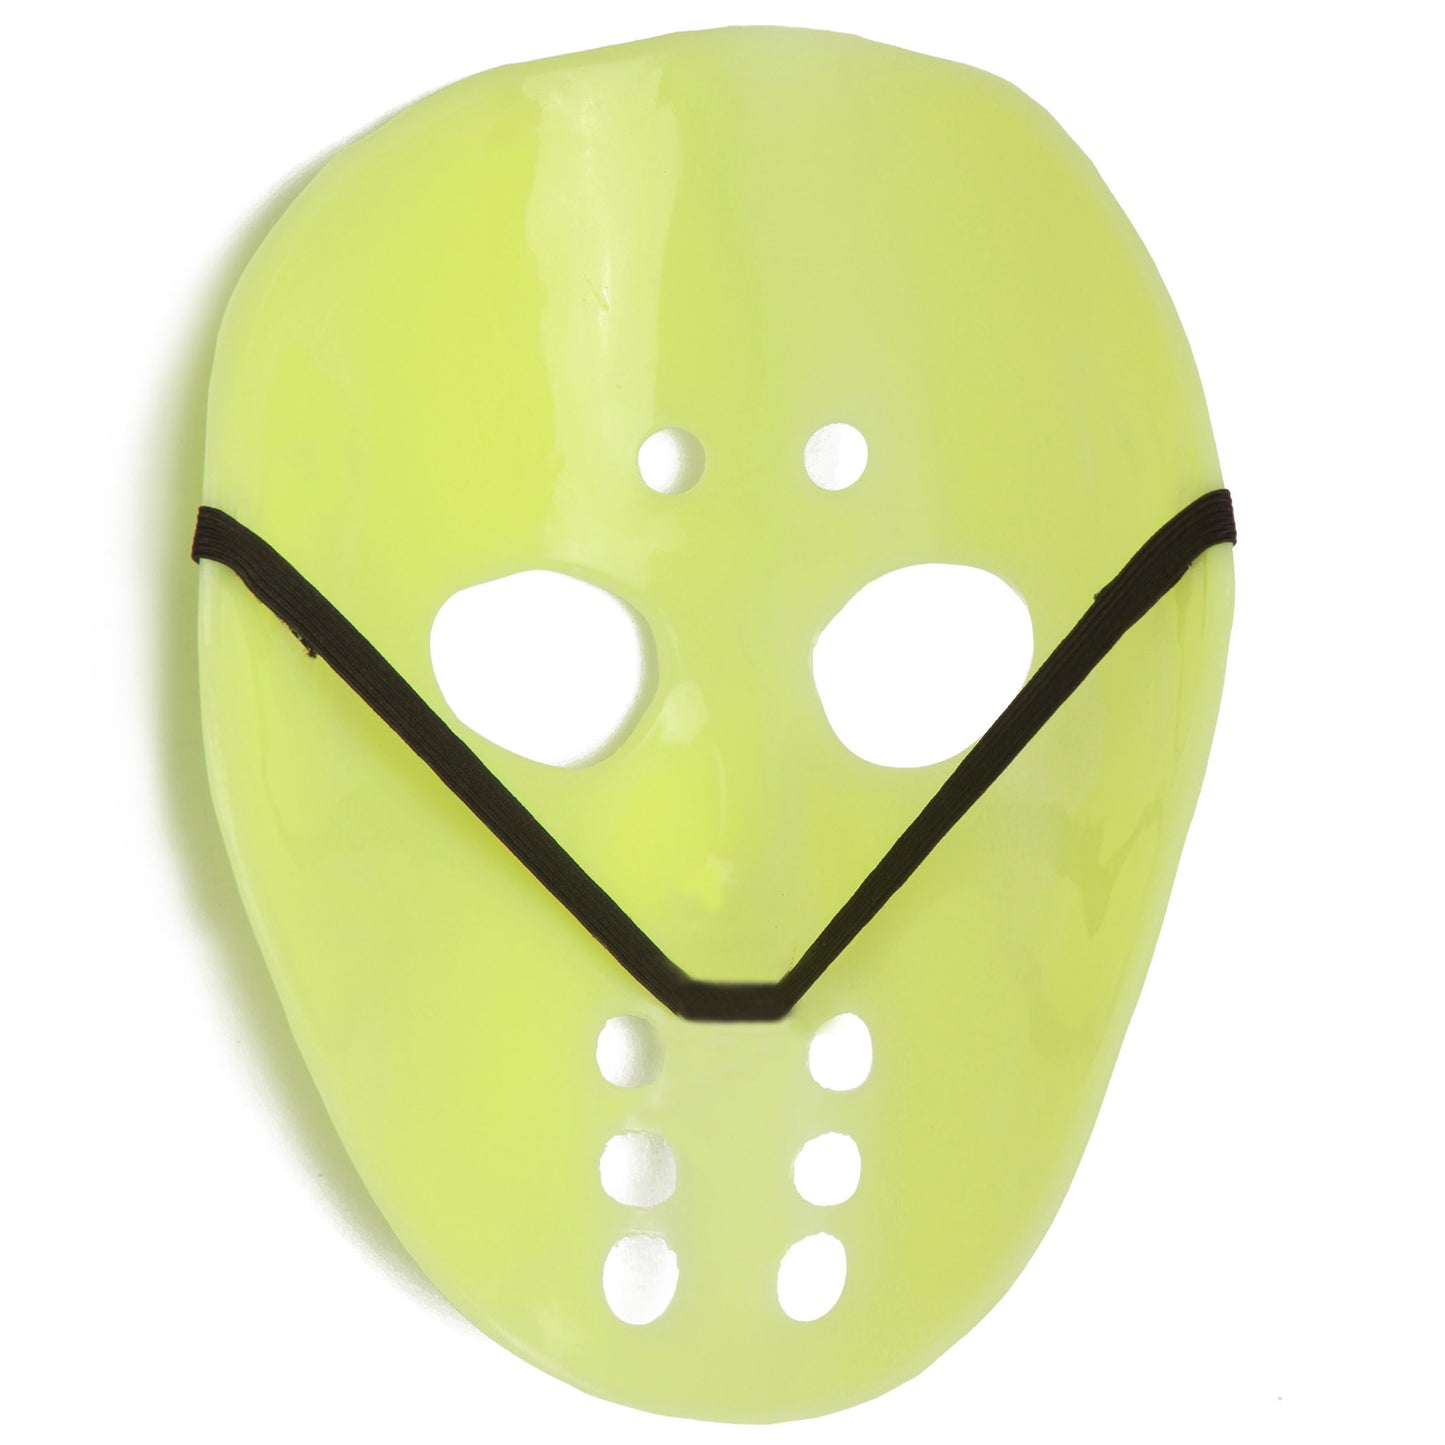 Glow in the Dark - Face Mask